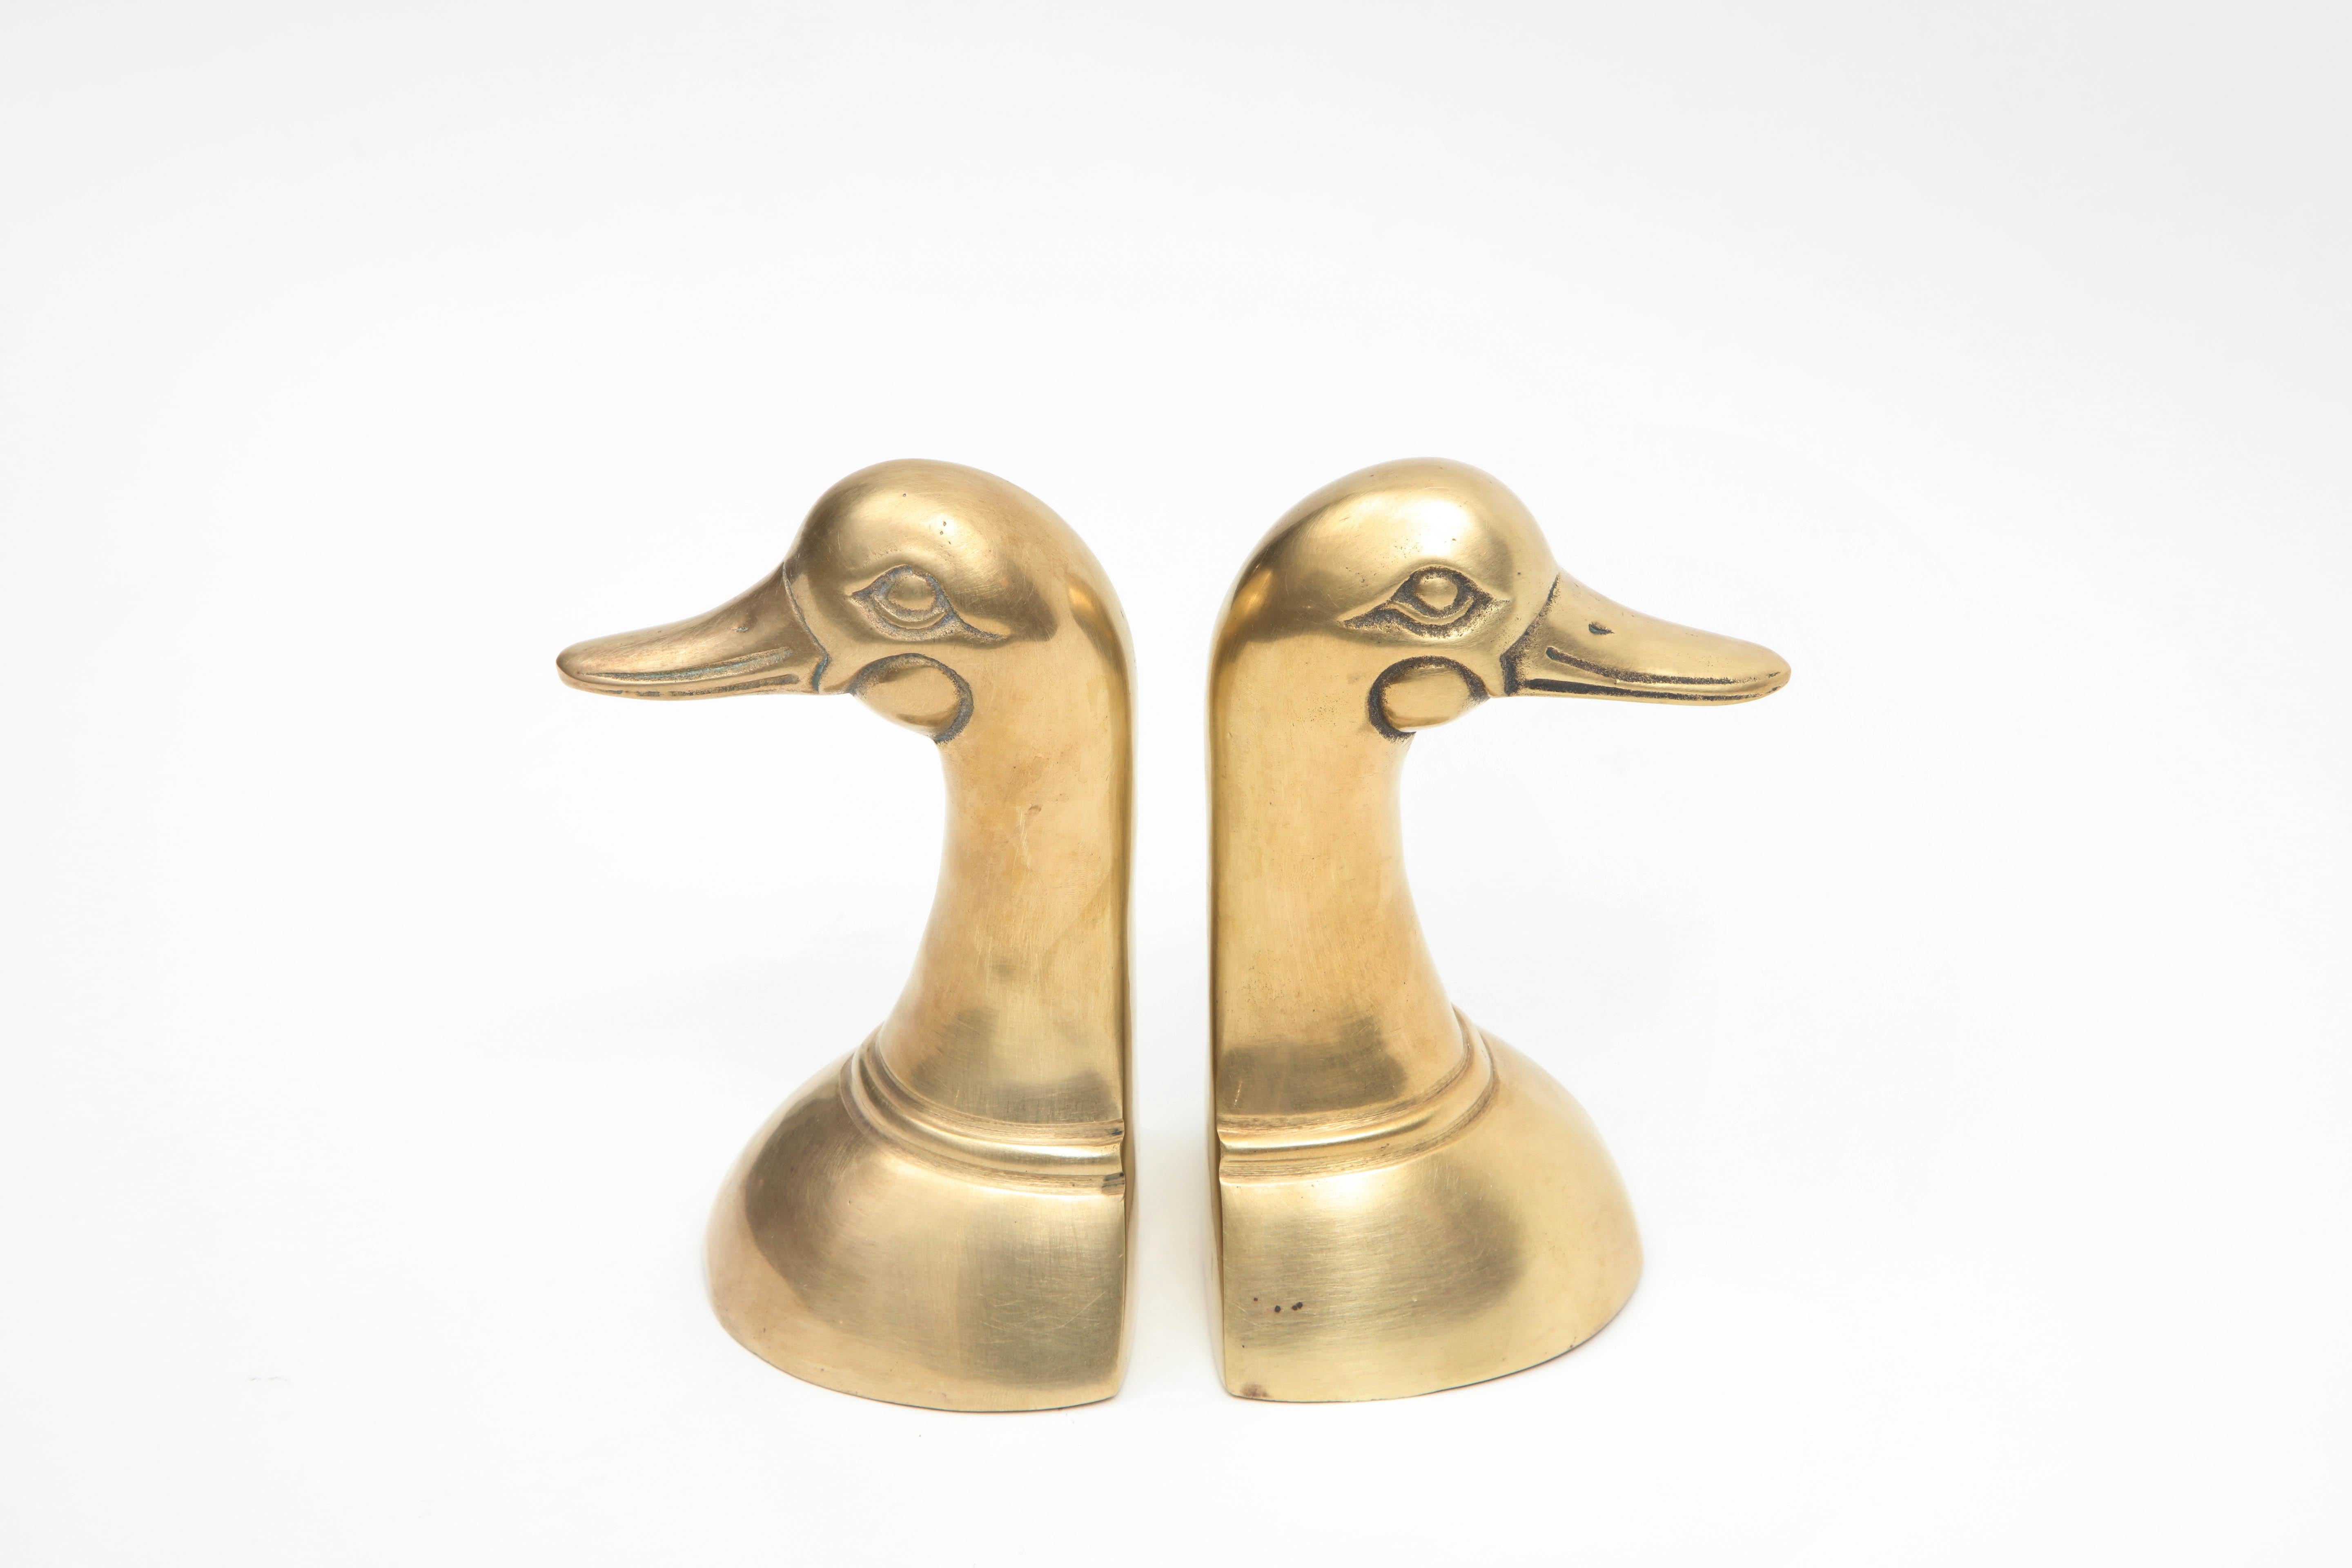 Decorative brass bookends. Each duck is H 6.5 inches, L 3 inches and depth is 3.5 inches.